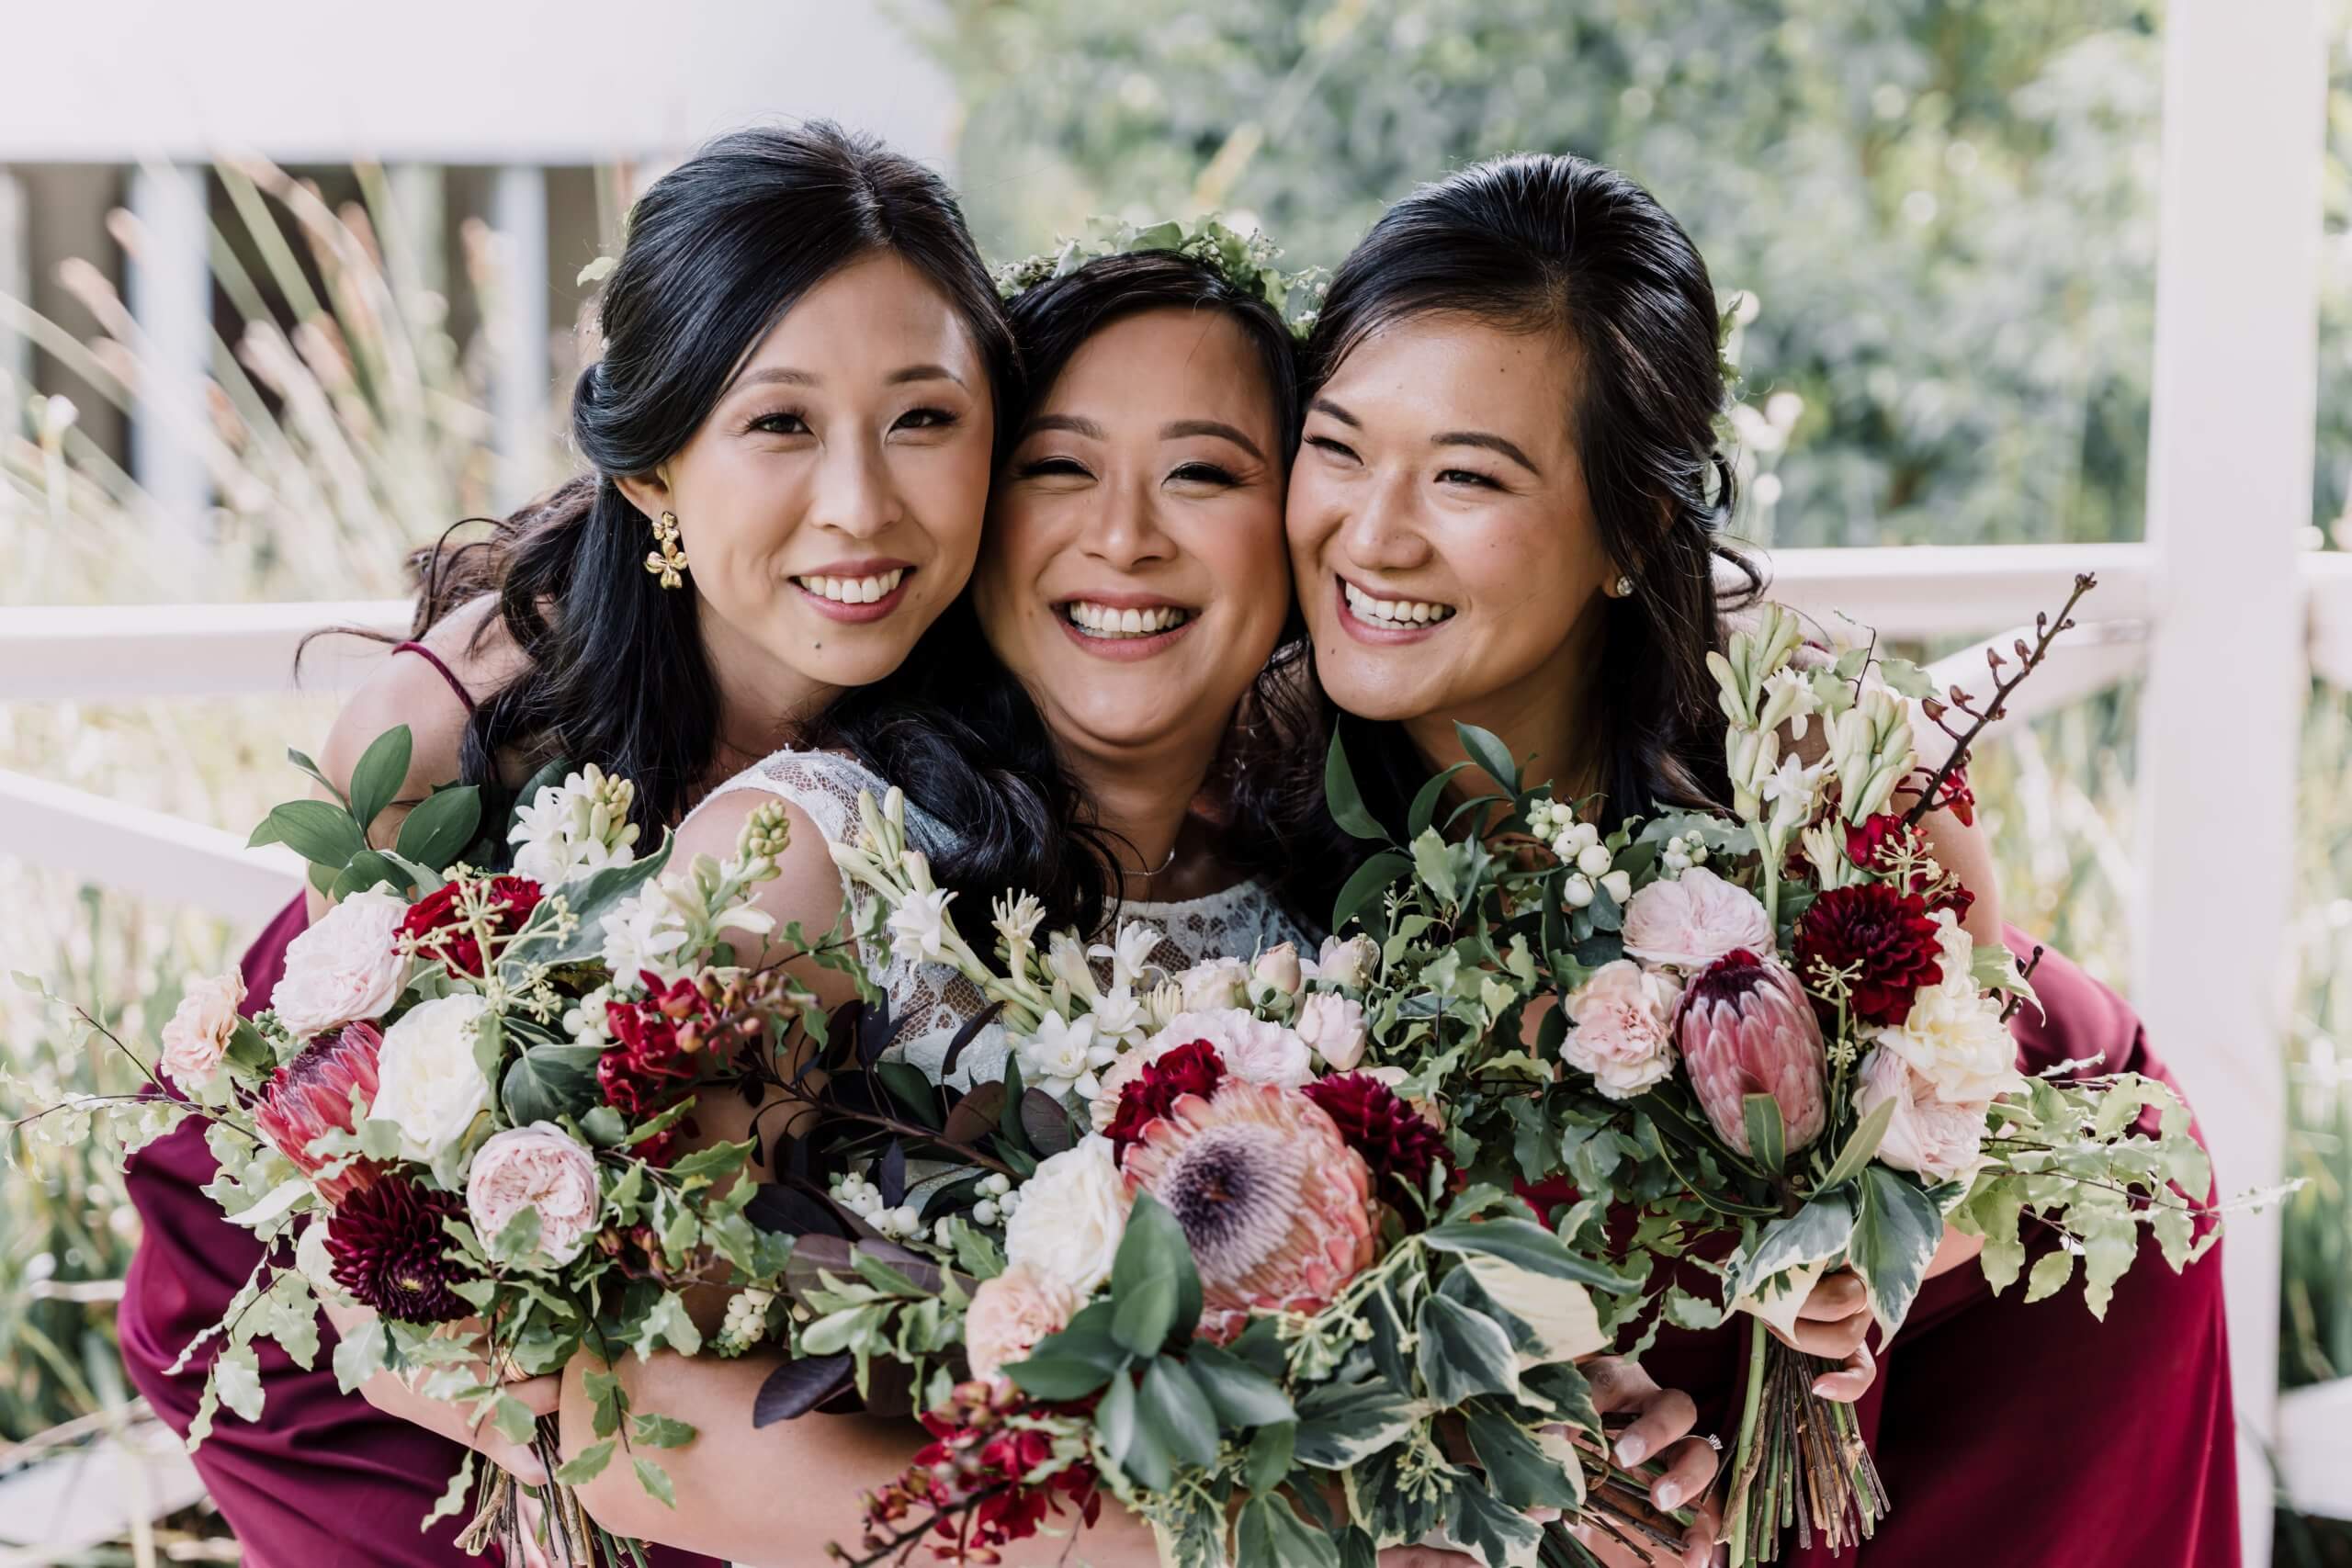 Lovely photo of the bride and her bridesmaids while holding colorful bouquets of protea and peonies.